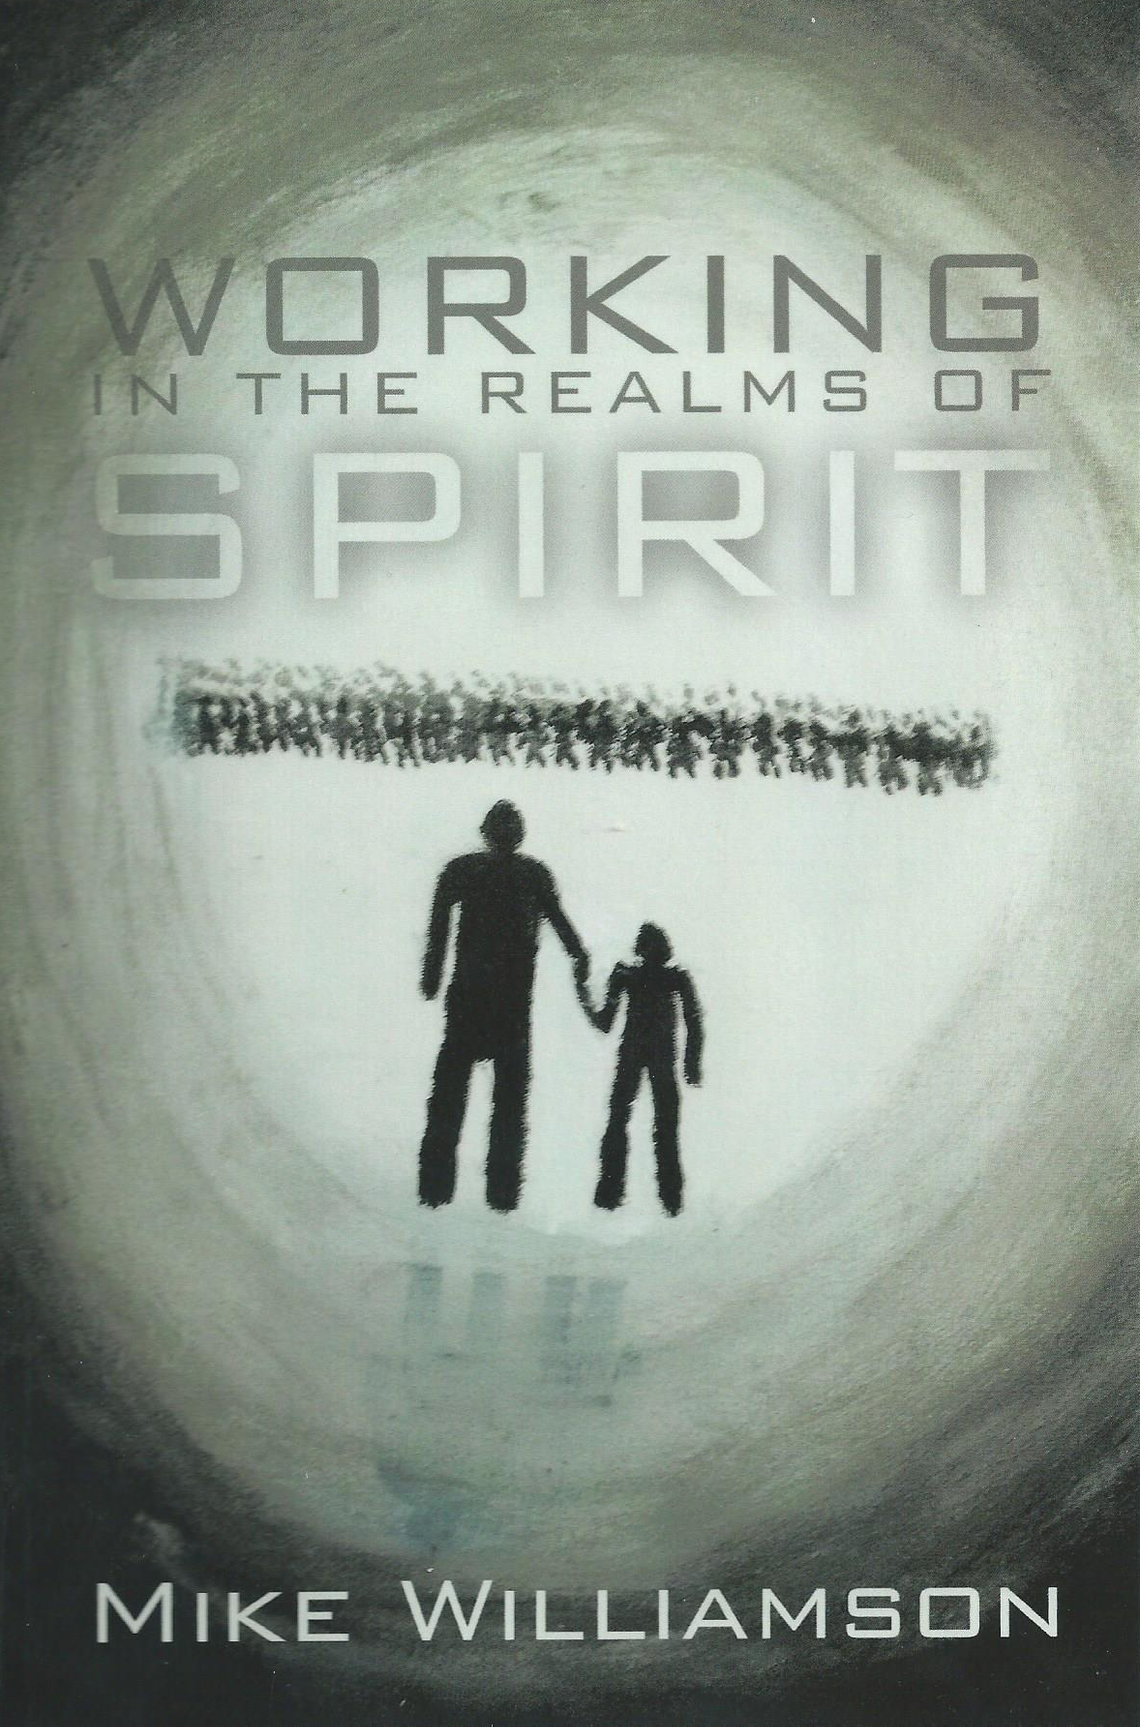 Working in the realms of the spirit